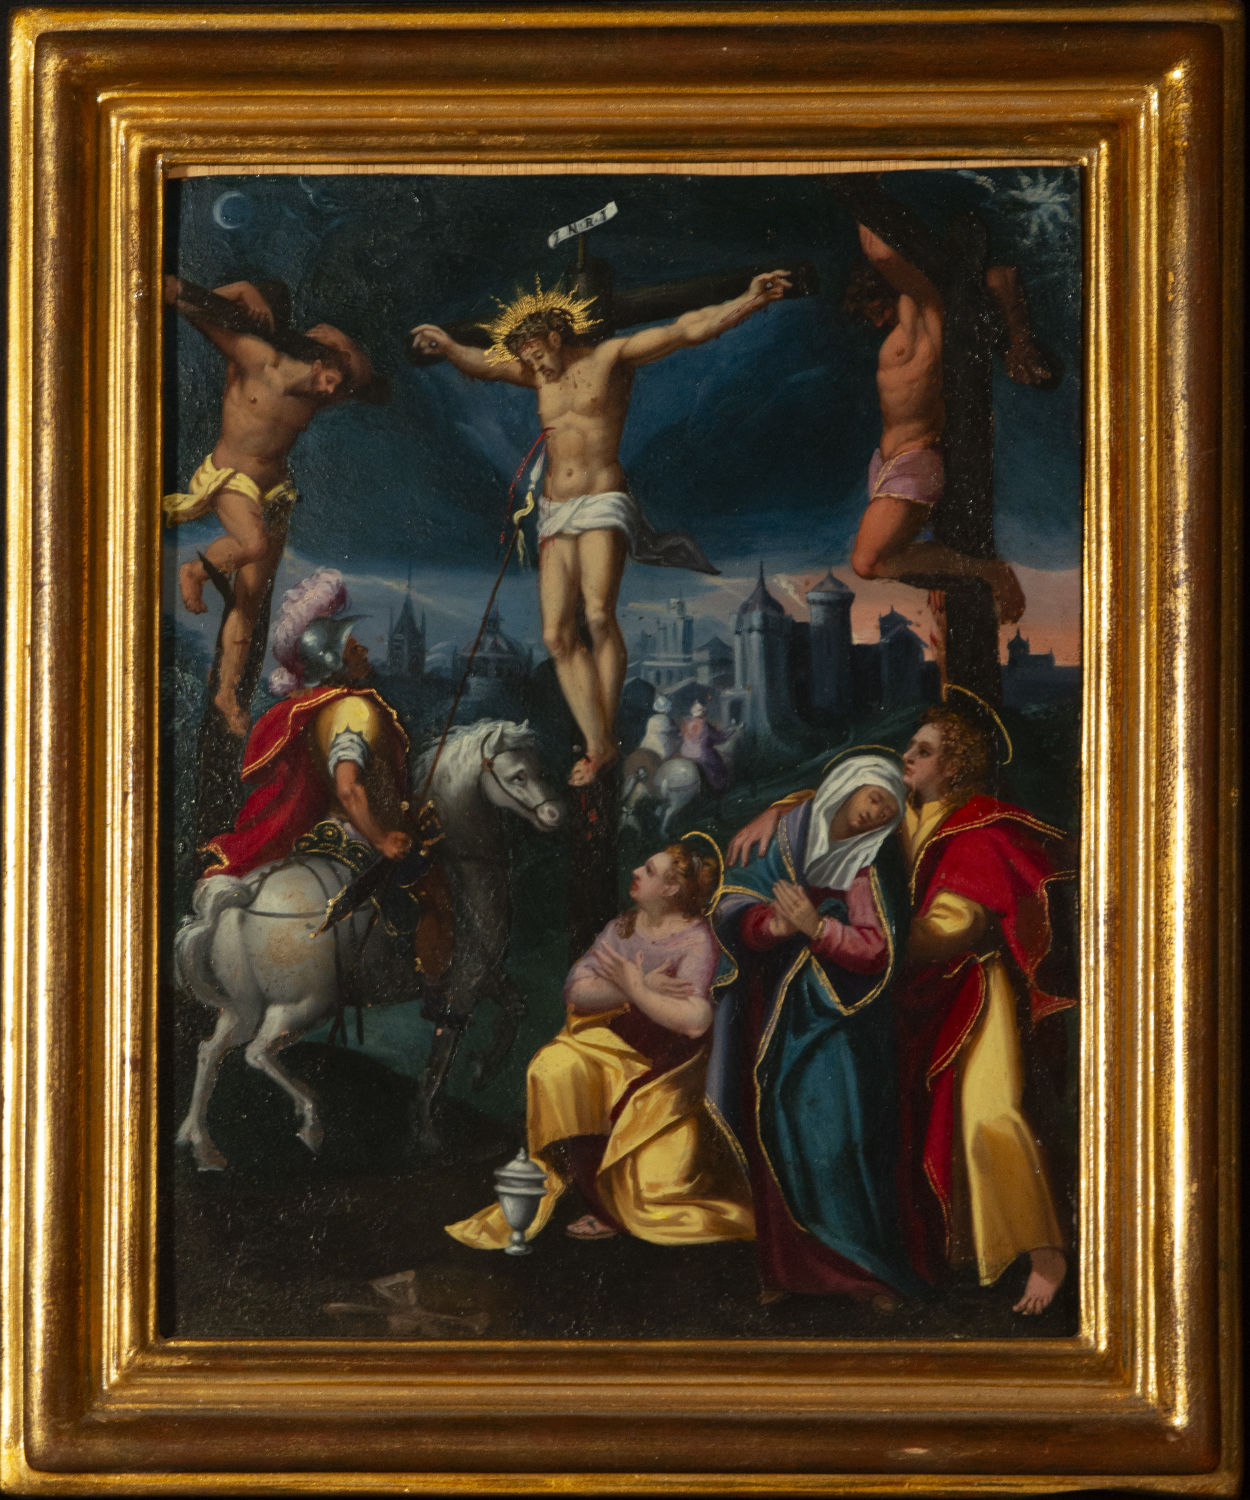 Attributed to Simon de Vos (Antwerp, 1603 – 1676) Christ on the Cross, oil on copper from the 17th c